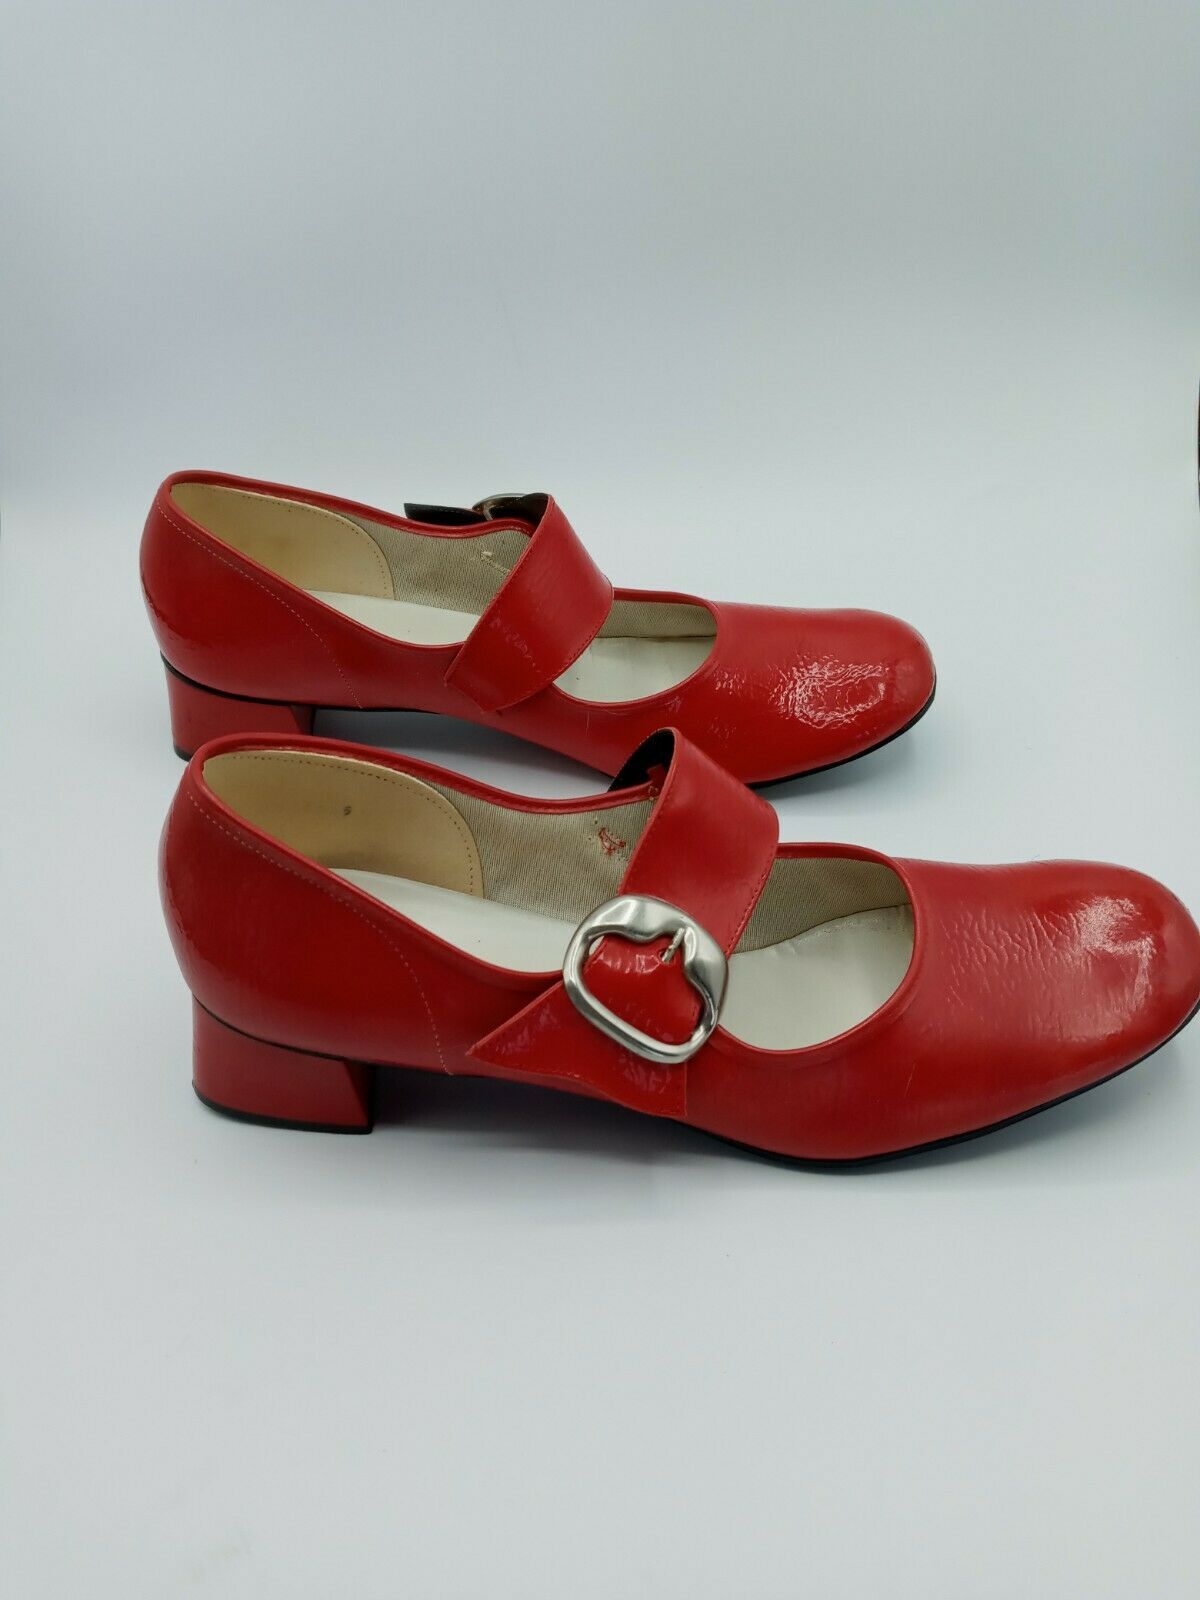 Vintage Hibrows Womens Red Patent Leather Mary Janes Dress Shoes